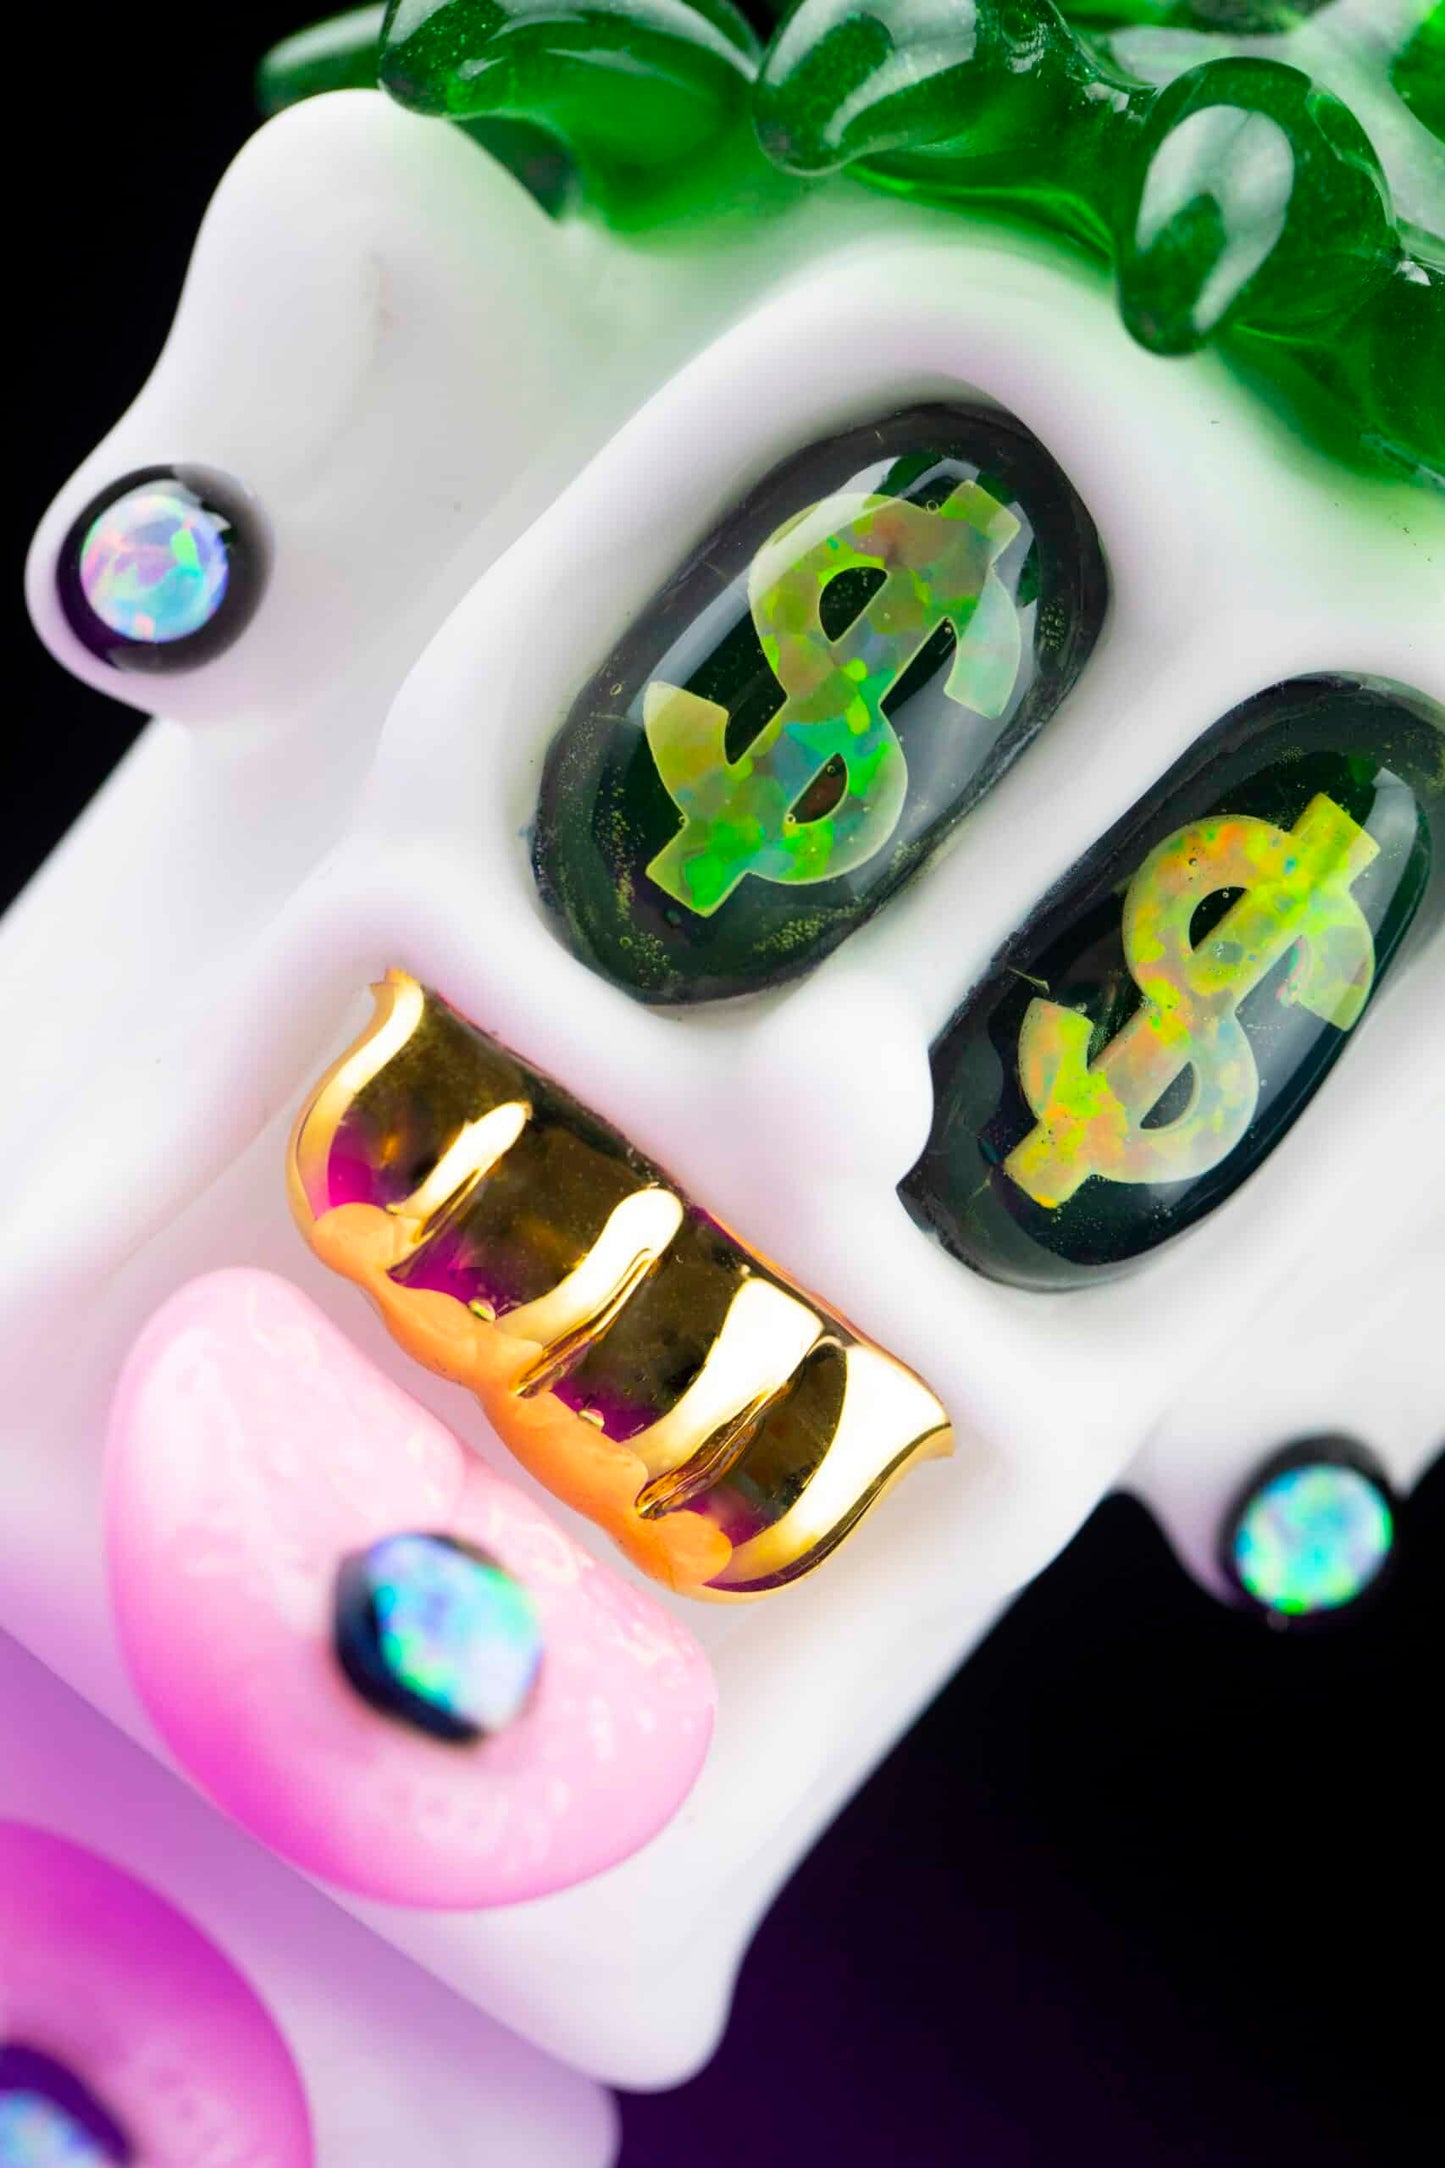 sophisticated design of the Mr. Richie Head Rig w/ Opal Earrings & Gold Grill by Ryder Glass